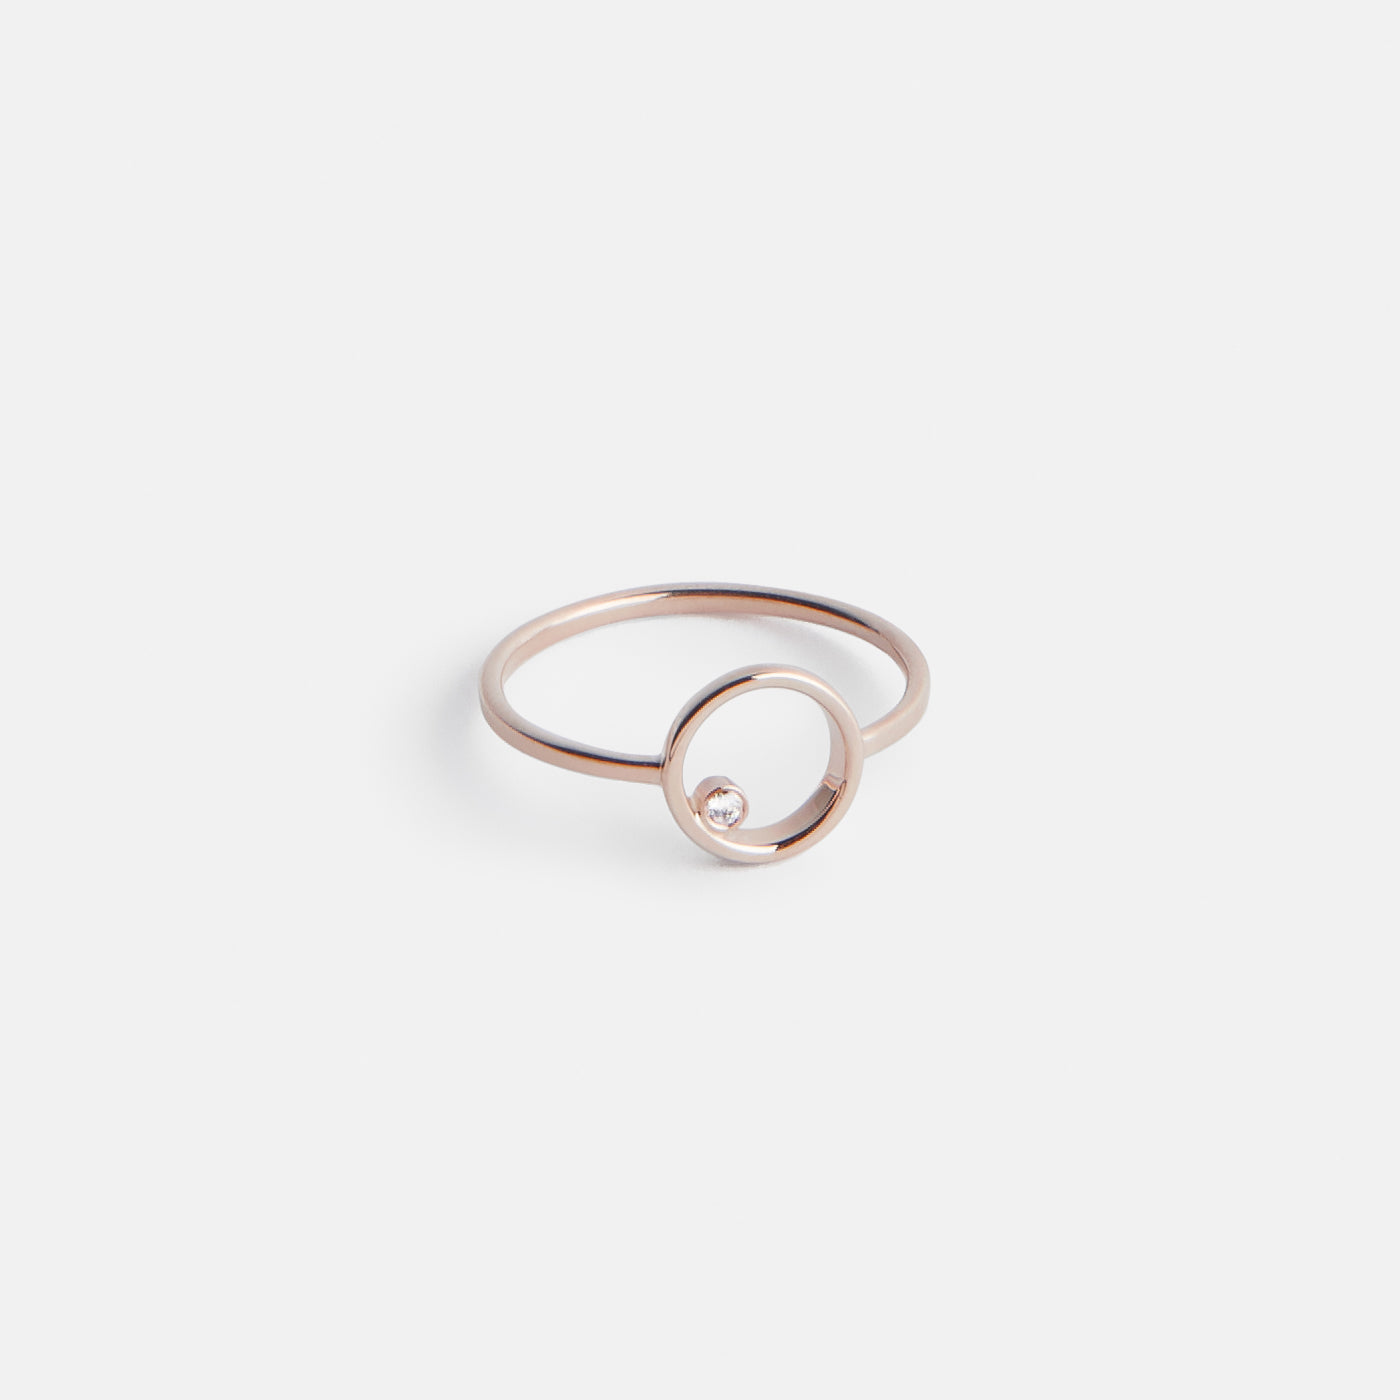 Ila Delicate Ring in 14k Rose Gold set with White Diamond by SHW Fine Jewelry New York City